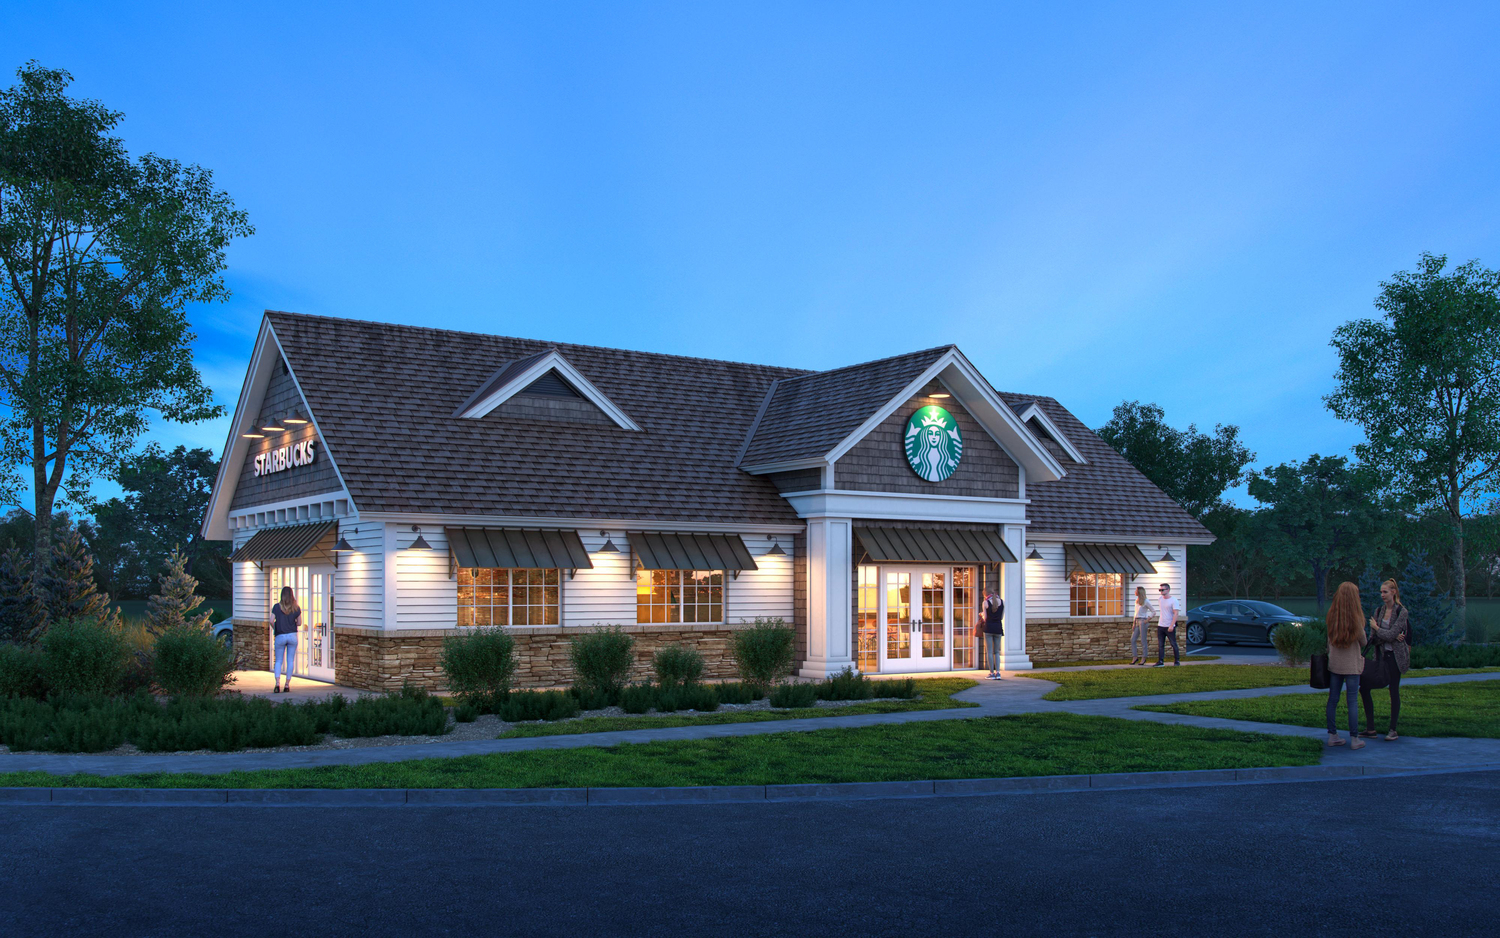 A rendering of the proposed Starbucks.